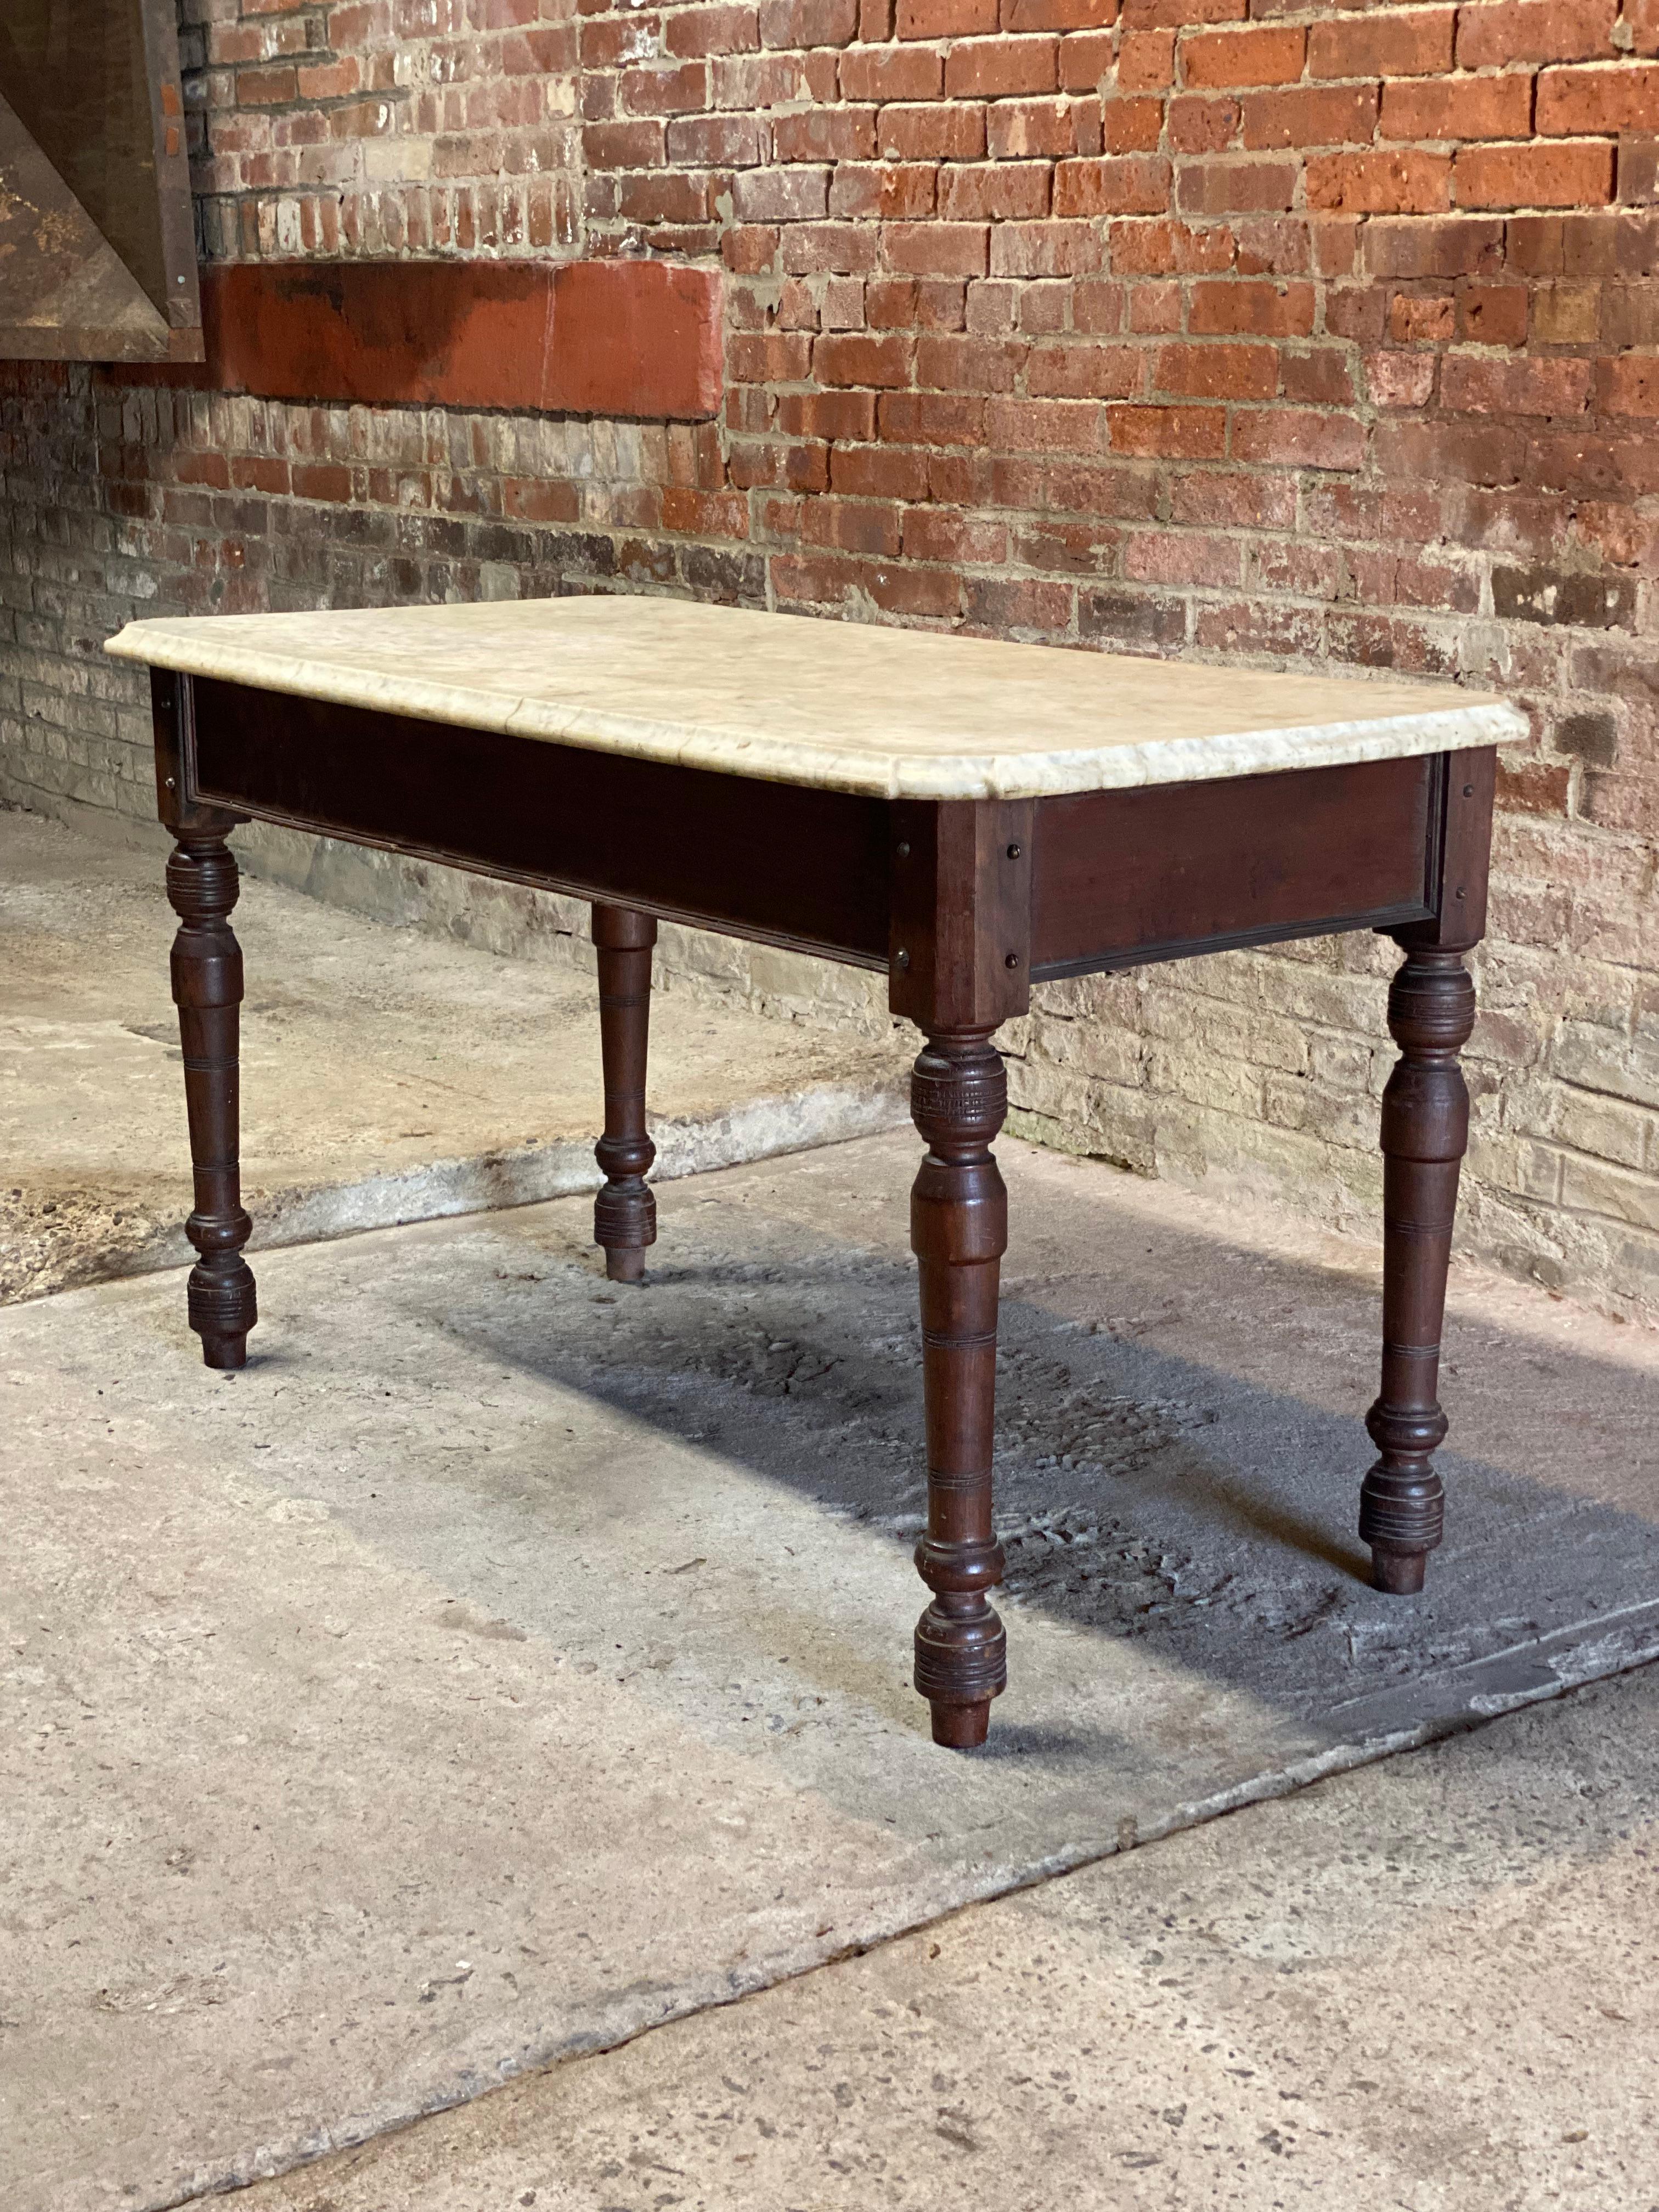 Late Victorian era solid walnut base farm table with a nicely shaped and rounded corner white marble top. Featuring dovetailed corners and middle stretcher construction, finely turned legs and recessed panels adorn the apron. Circa 1870-1890. 

The